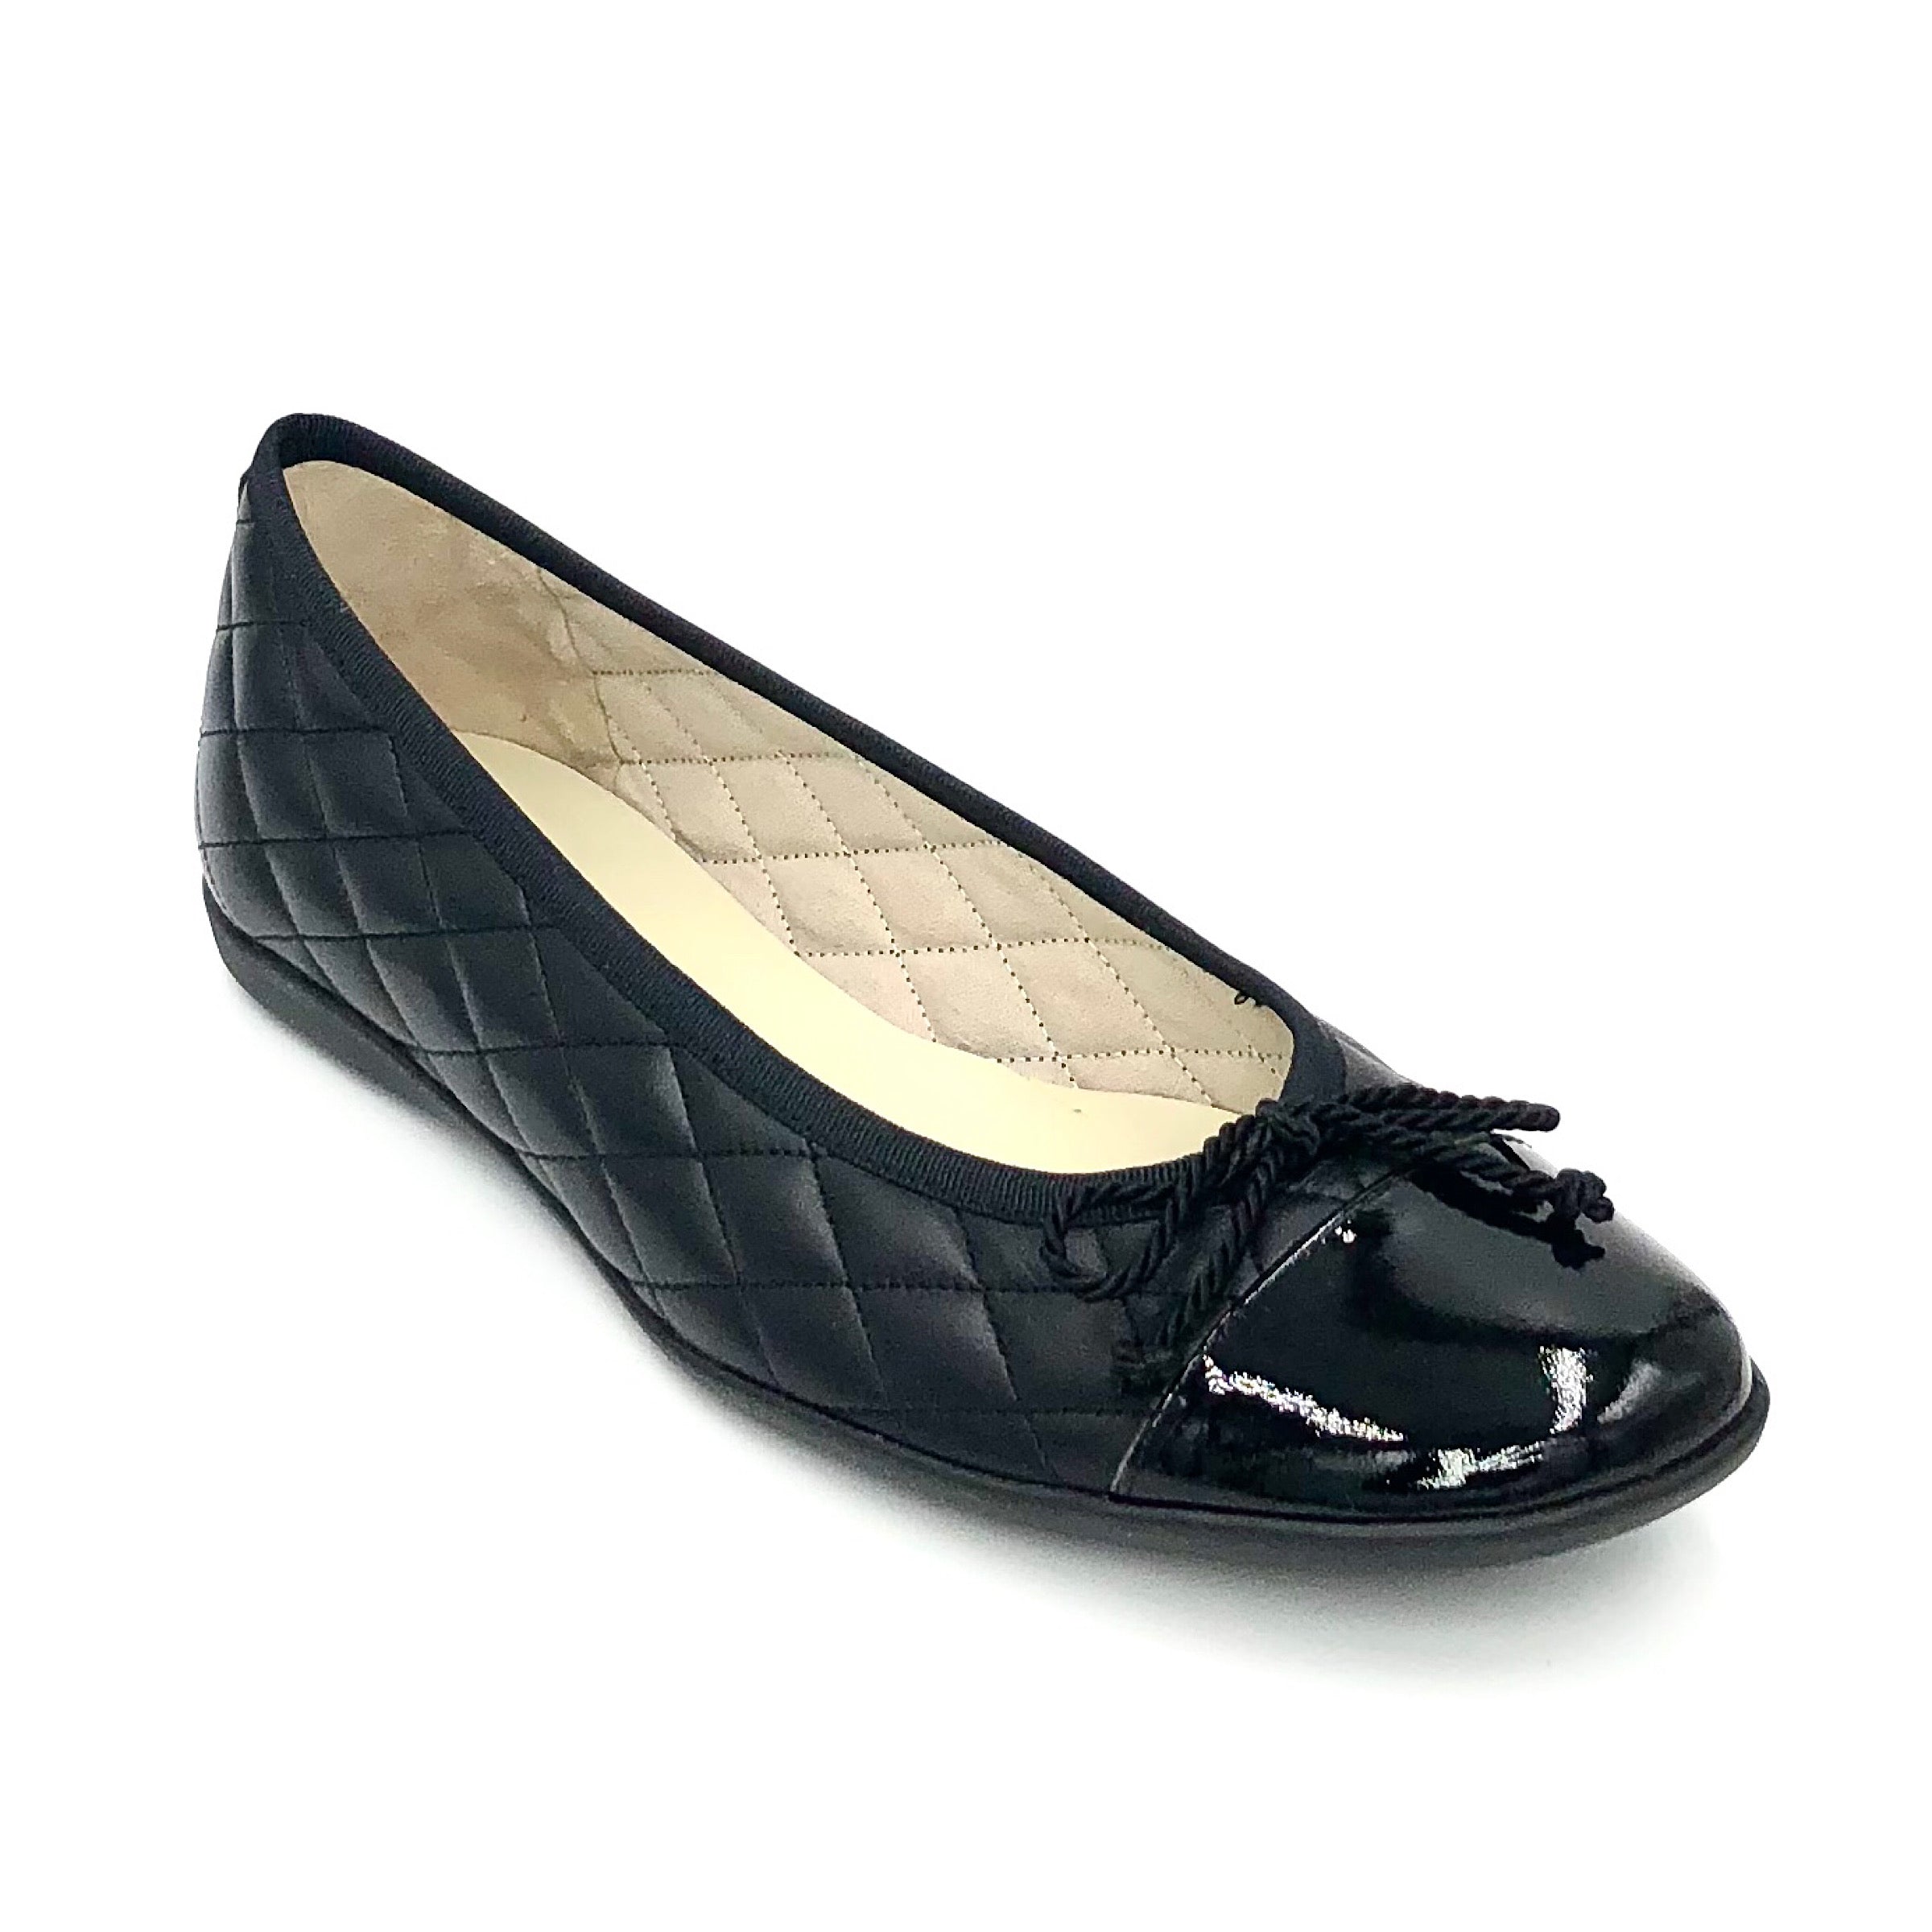 Passport - The Quilted Cap Toe Ballet in Black,. You will simply love this best selling classic ballet flat with adjustable tie. It is a must for everyone's shoe closet! Supple quilted leather upper, patent leather cap toe, leather lining & full rubber sole.